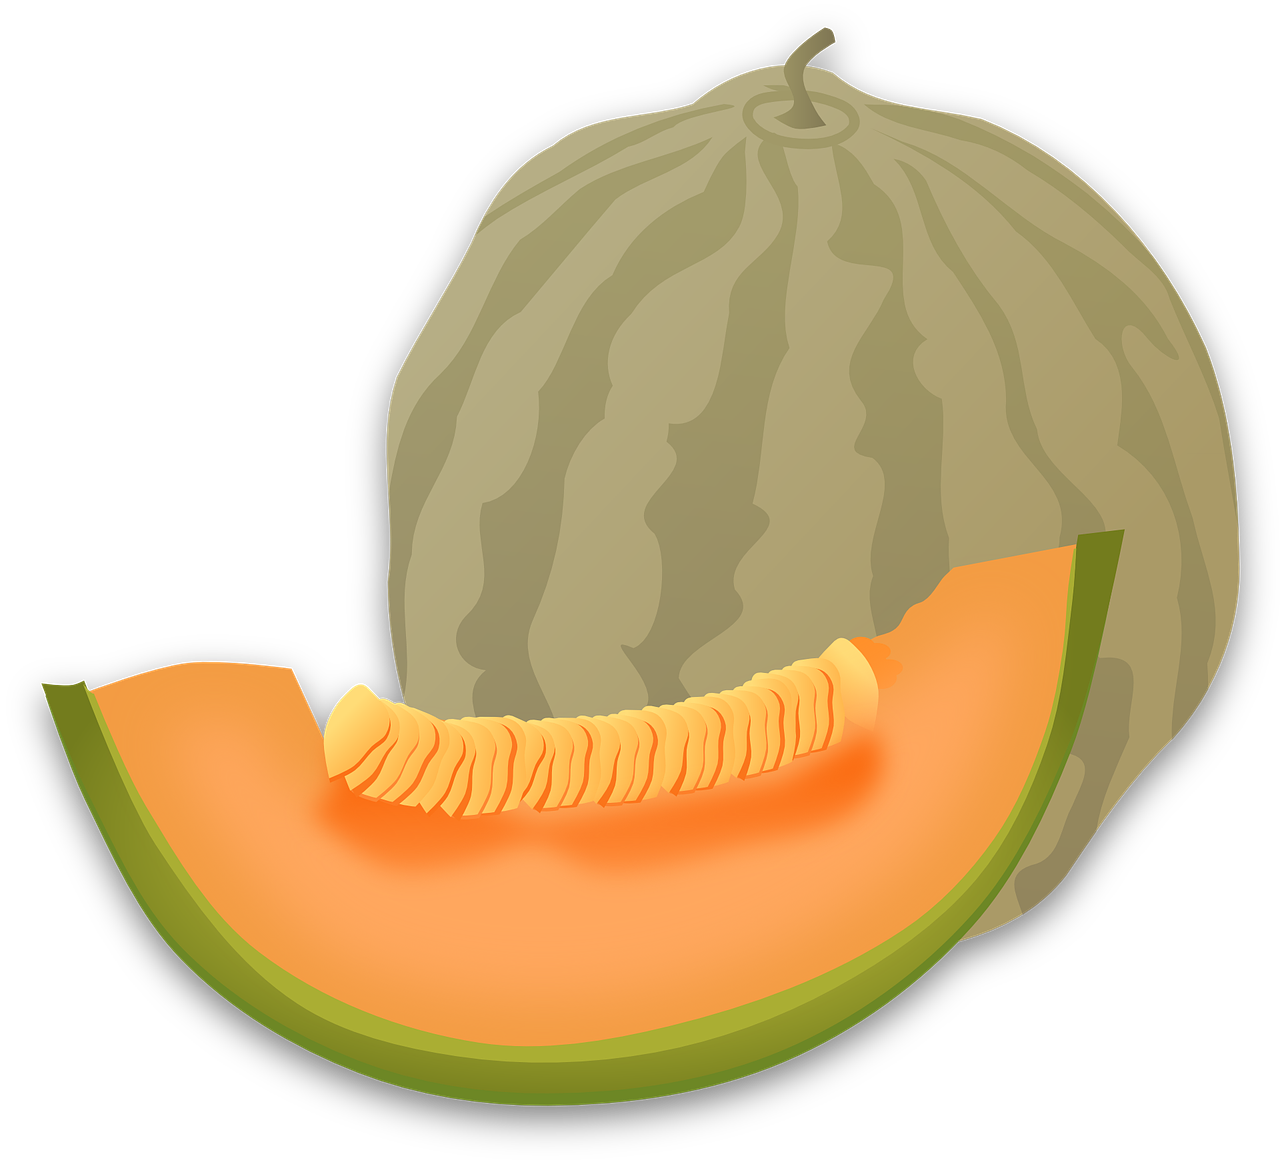 Cantaloupe Slices PNG Clipart